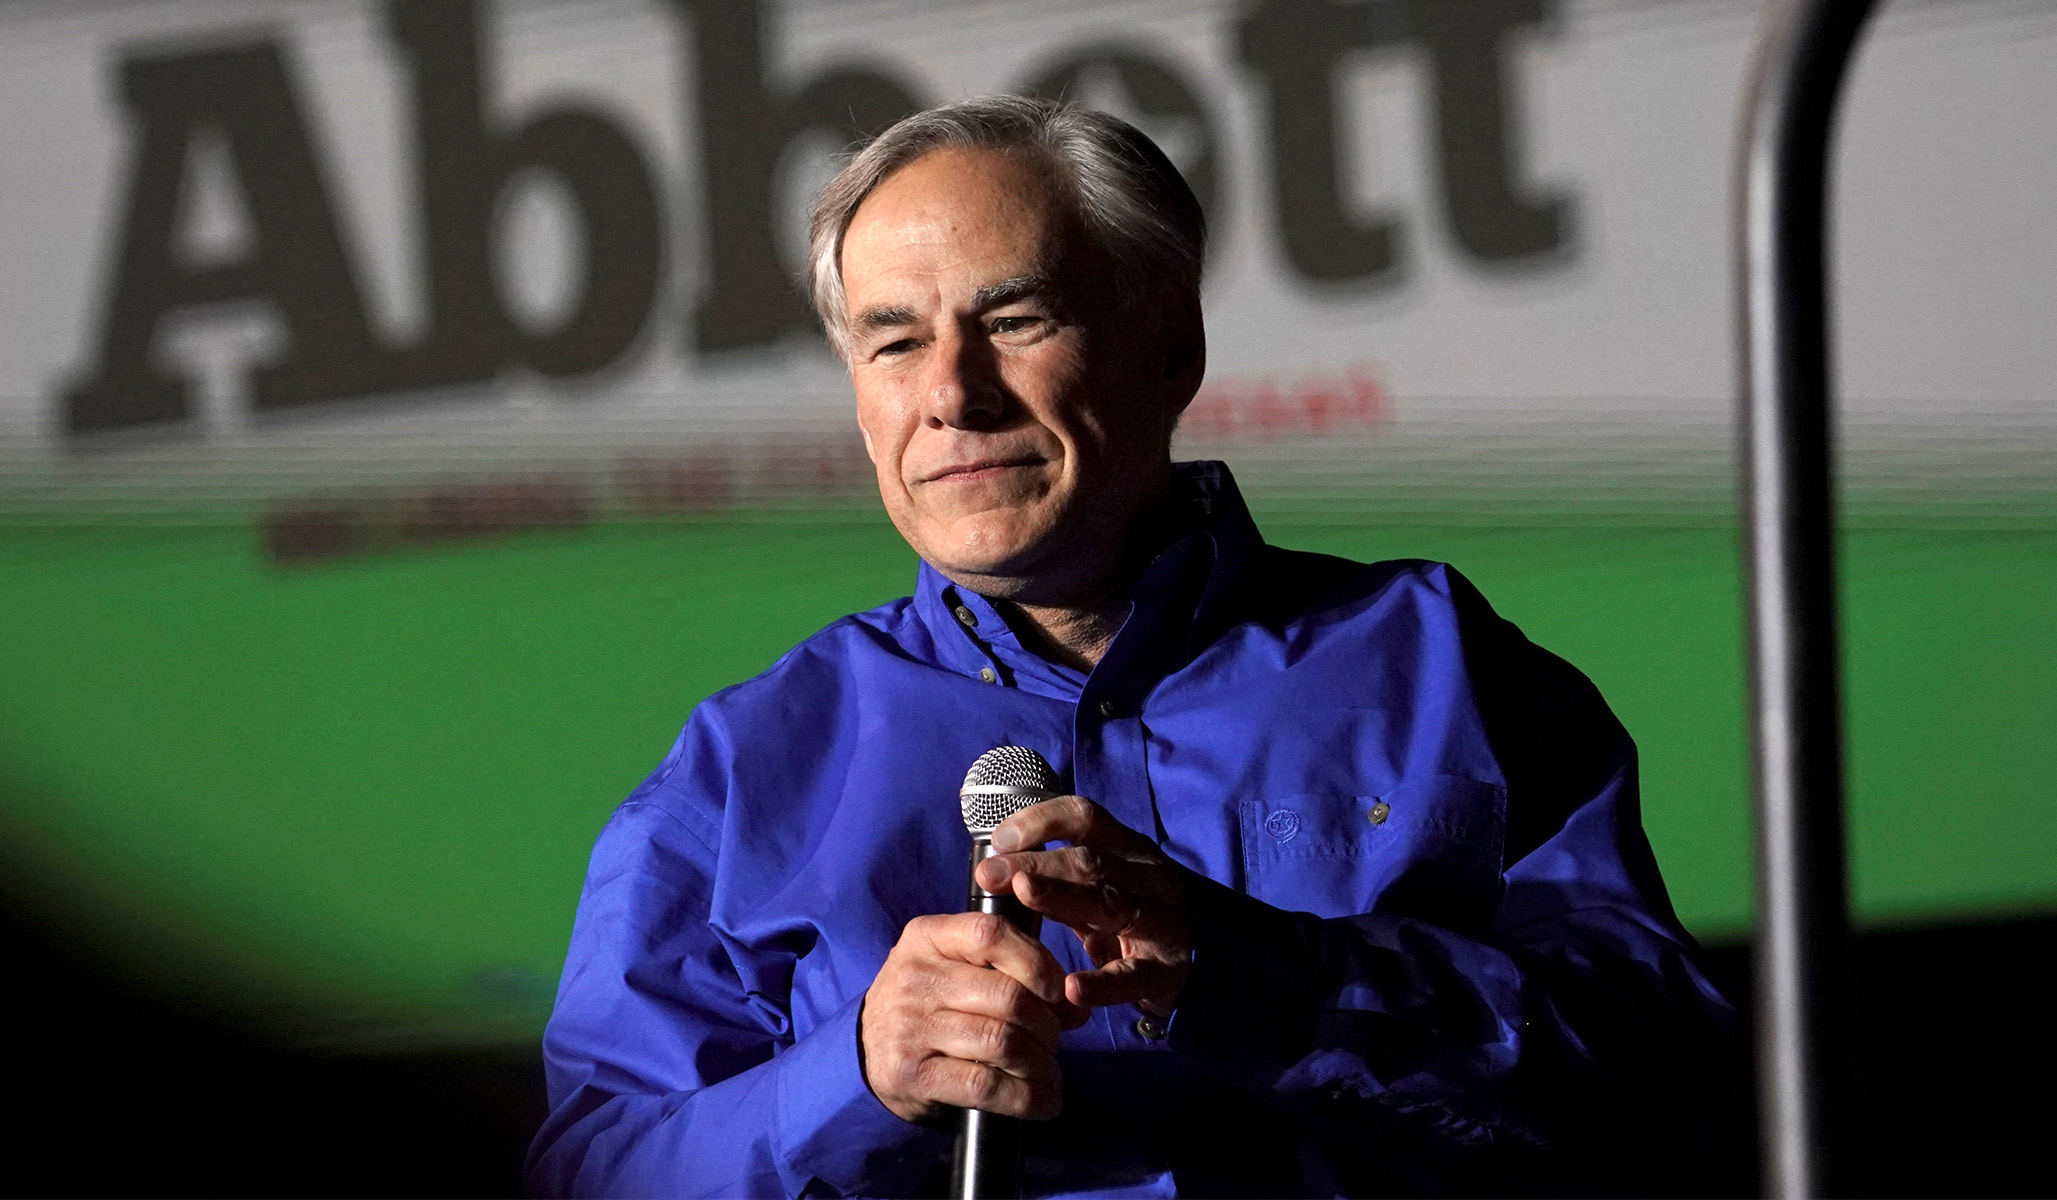 LOL: Governor Abbott Directs Texas to Send Illegal Migrants to D.C. on Charter Buses Gregabbott